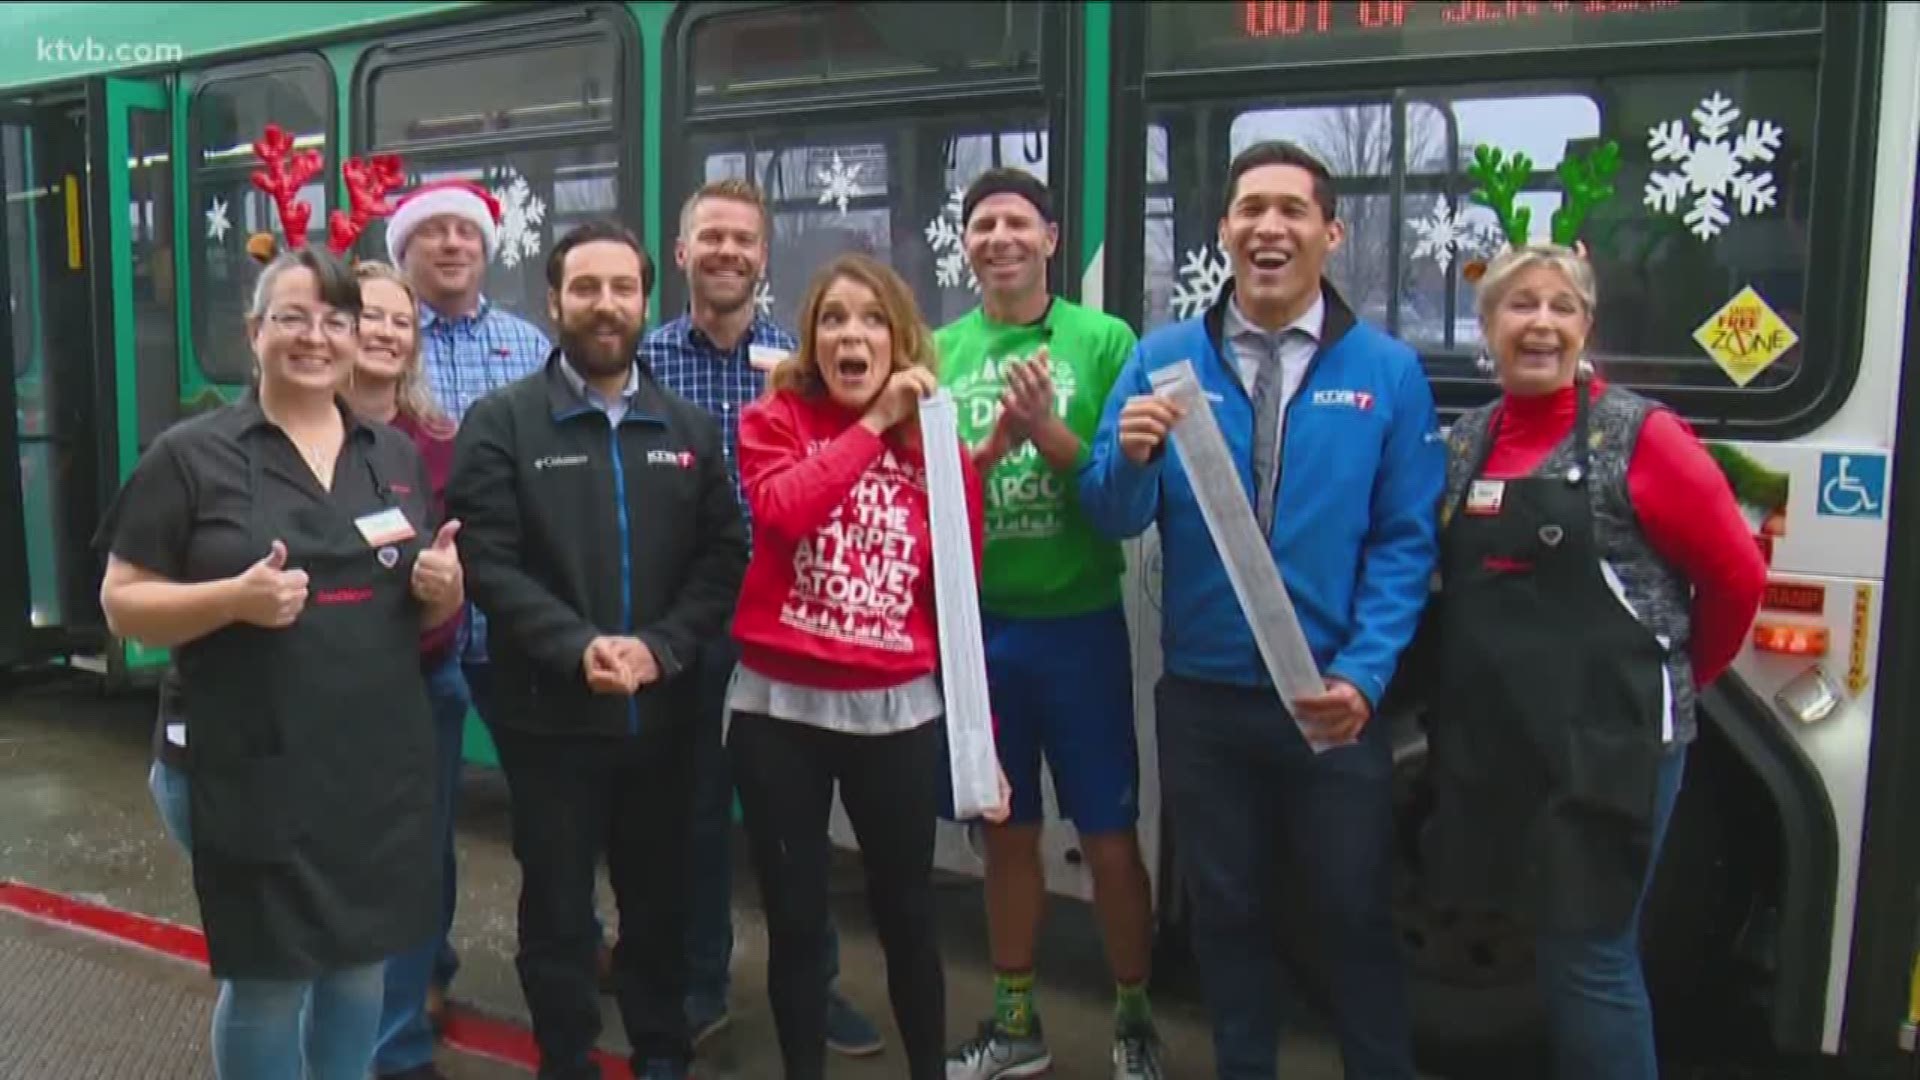 The 23rd annual Stuff the Bus toy drive is scheduled for 10 a.m. to 6 p.m. on Saturday, December 7 outside all Fred Meyer stores in the Treasure Valley.